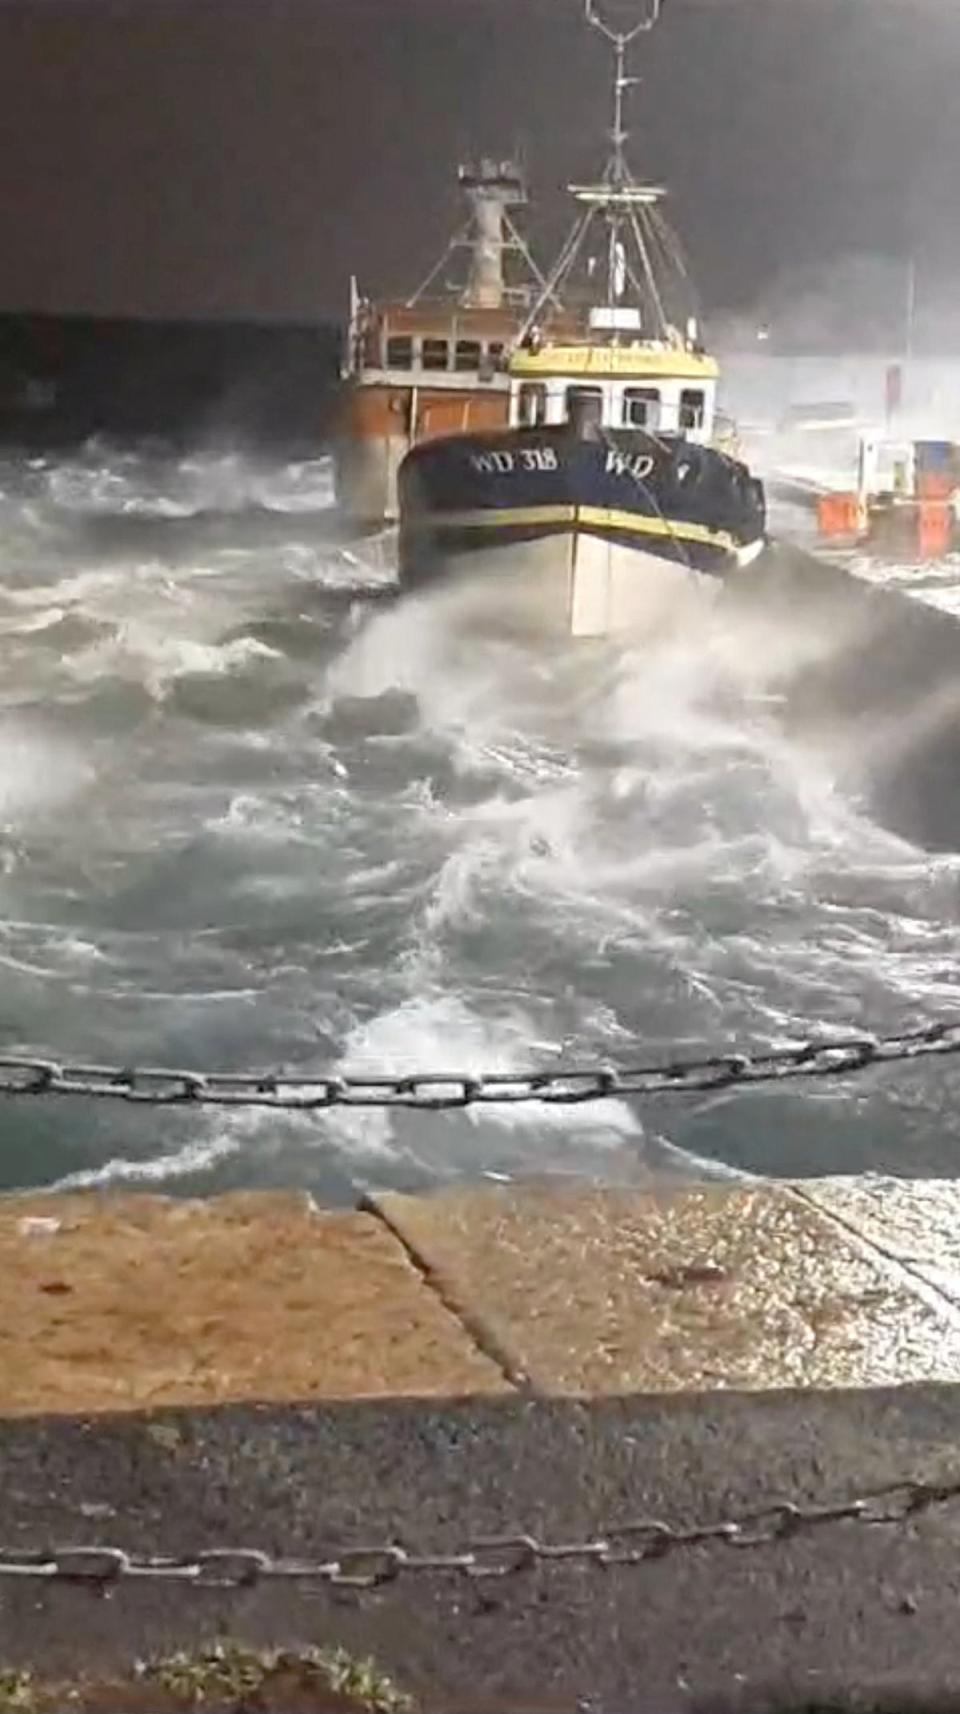 Waves hit a structure at the Ireland coastline during Storm Isha in Dublin (via REUTERS)